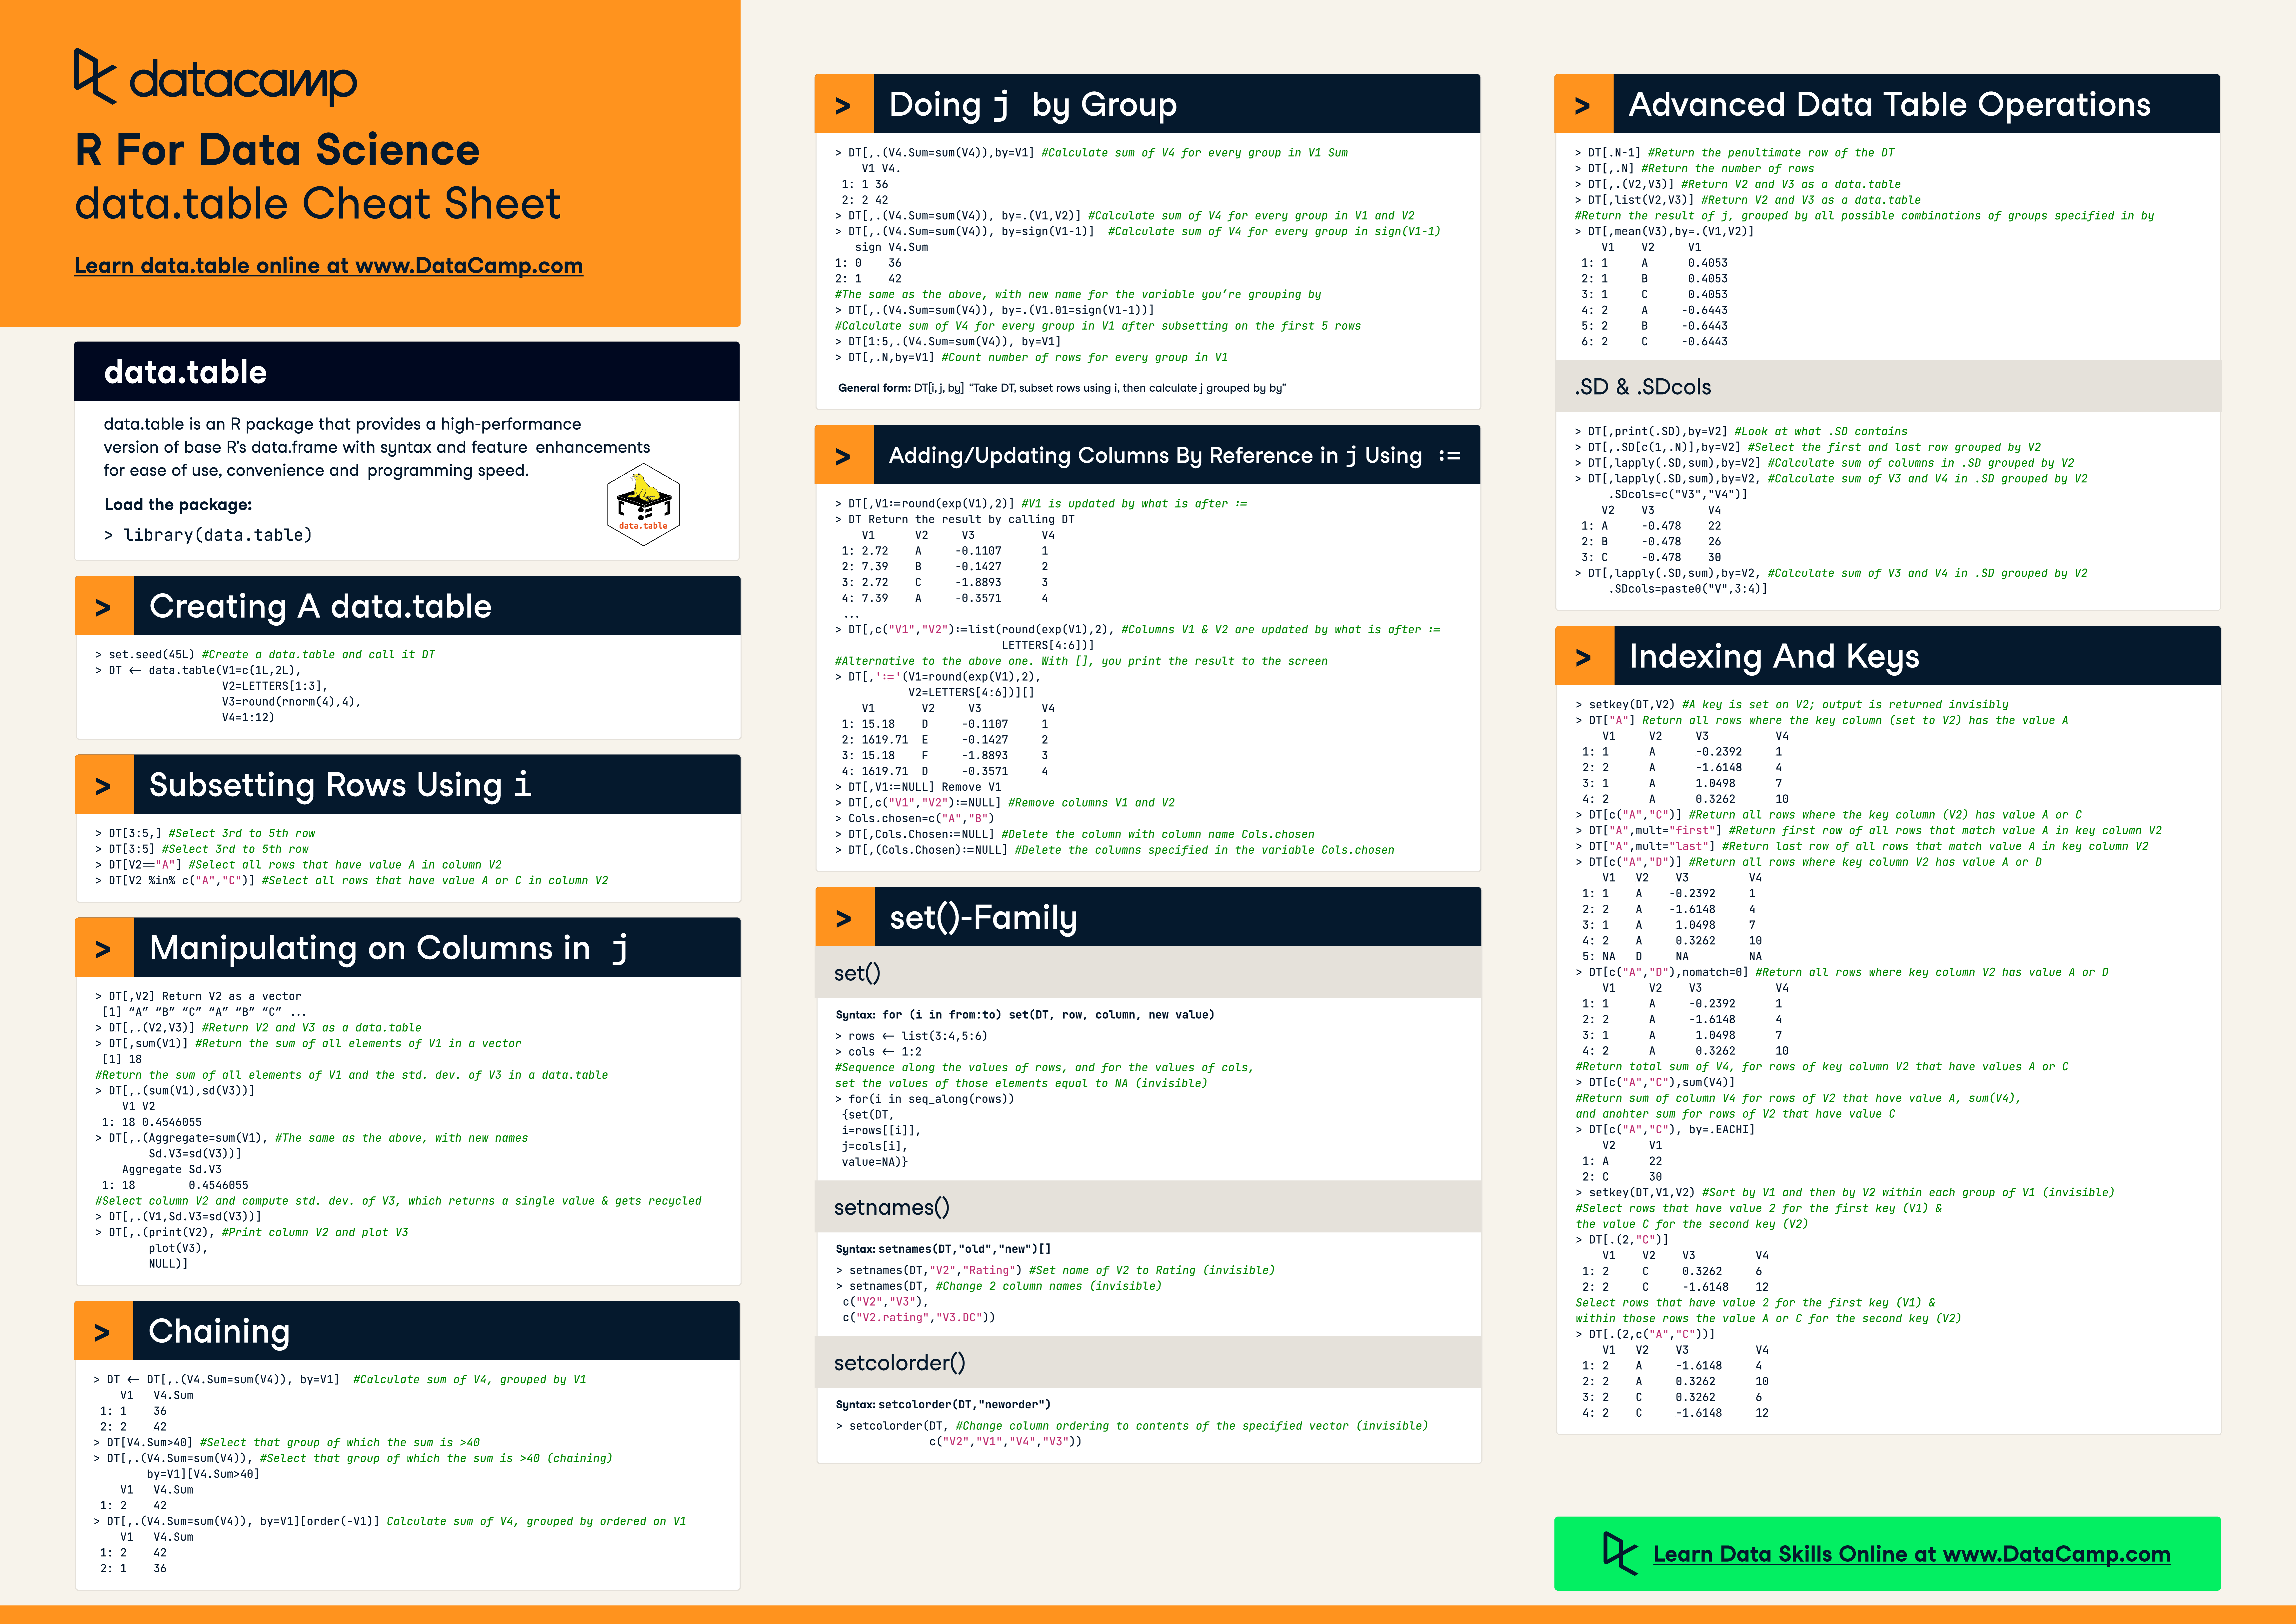 R for Data Science Cheat Sheet PDF